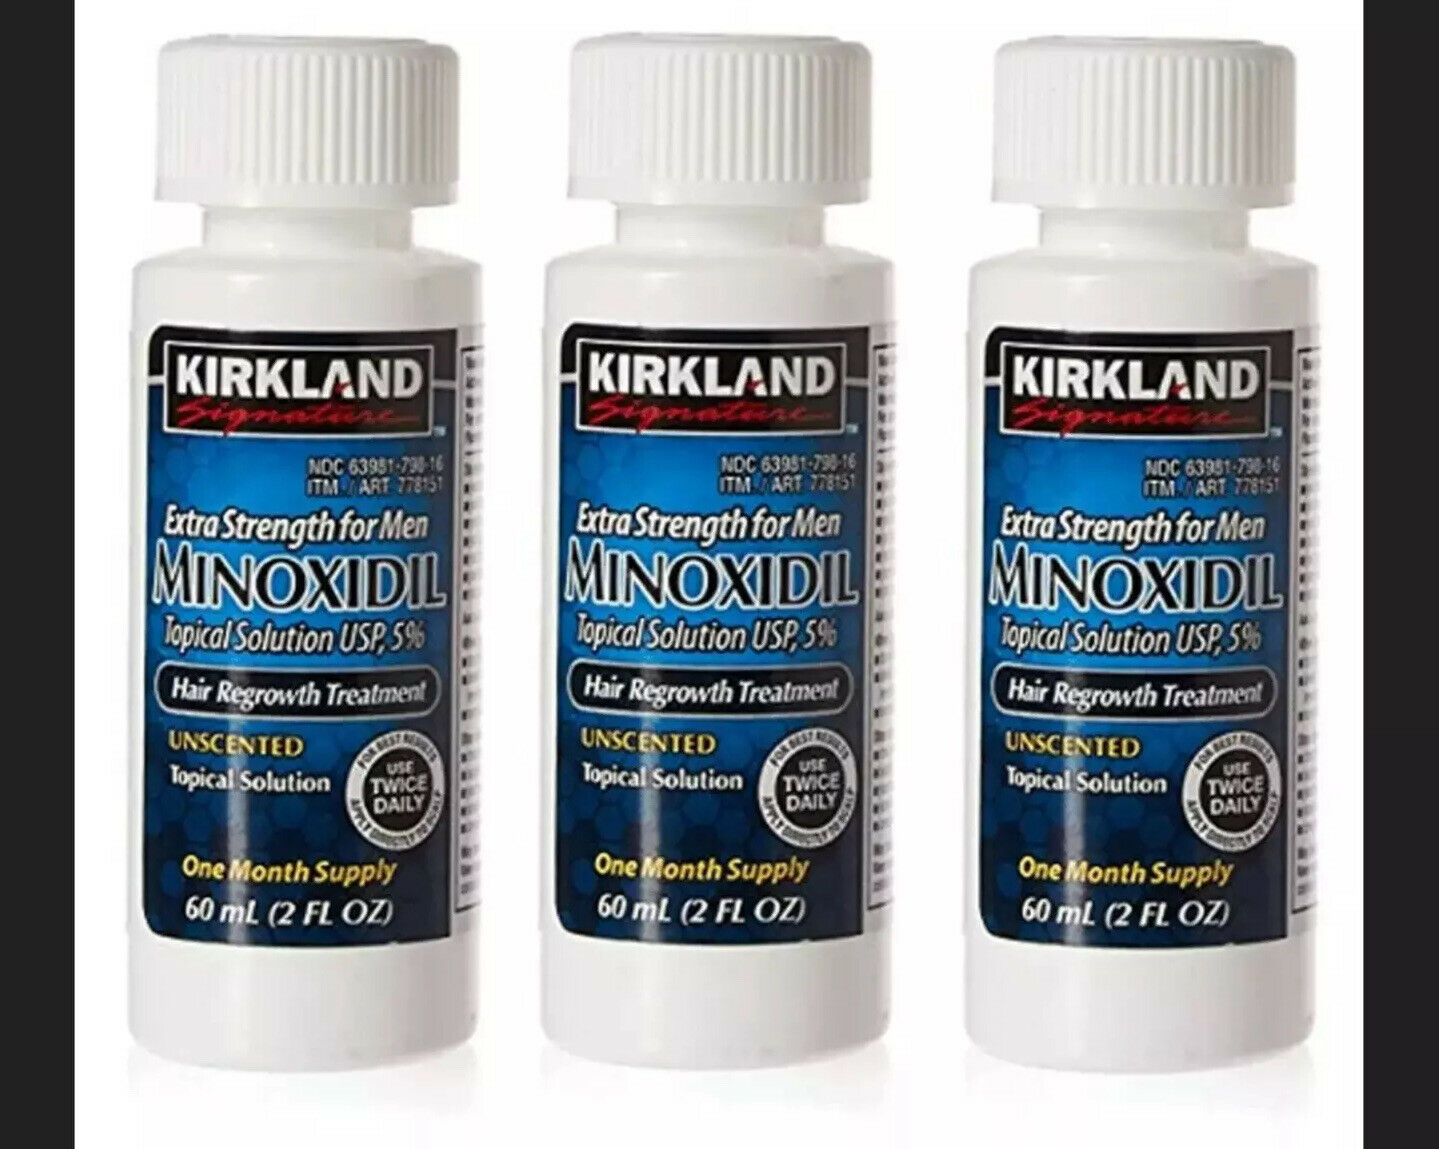 FDA APPROVED - Kirkland Signature Hair Regrowth Treatment Extra Strength for Men 5% Minoxidil Topical Solution, 3 Month Supply (3 x 60 mL)